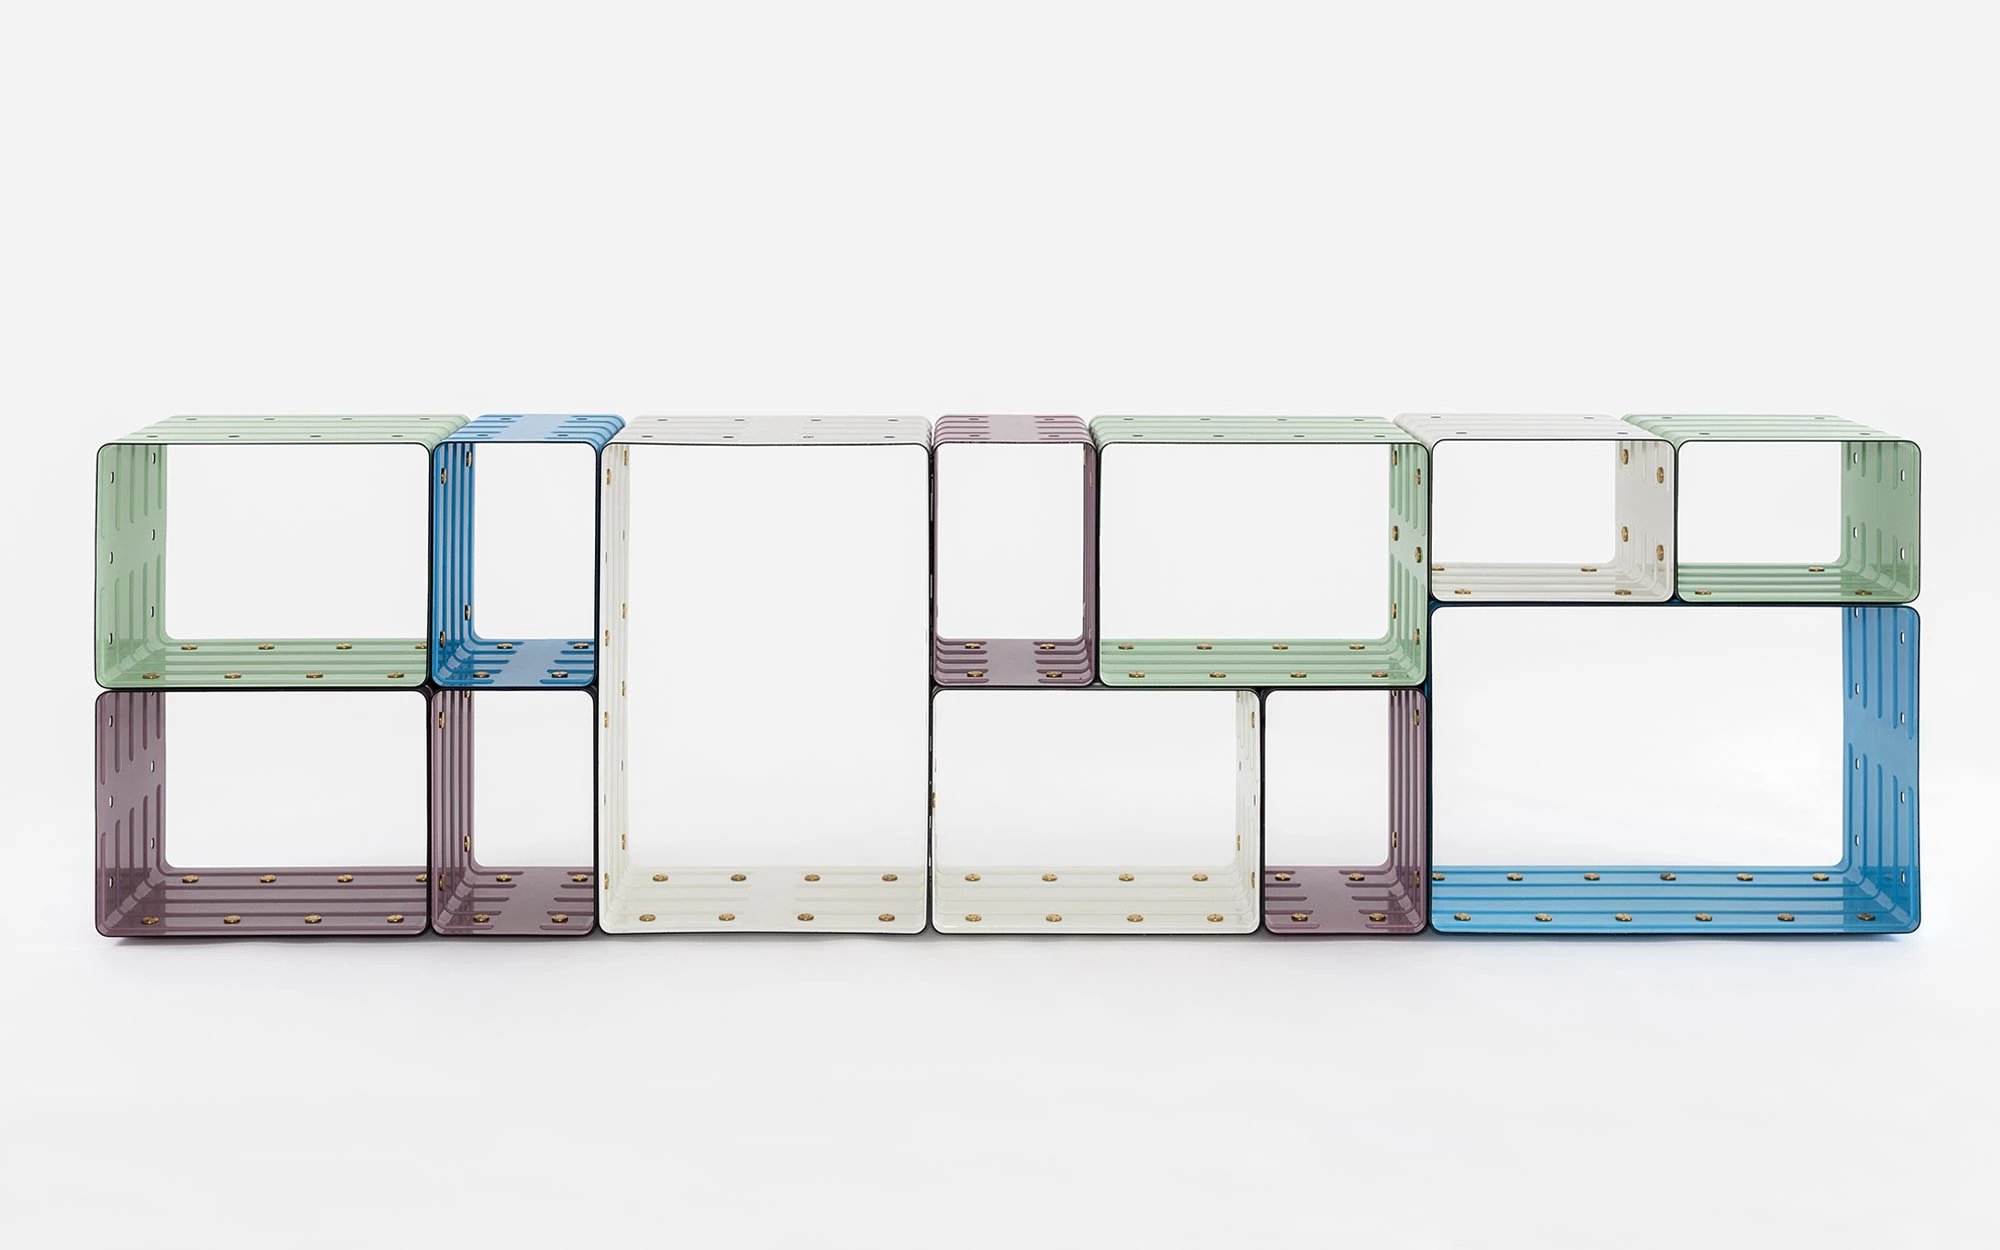 Quobus 2,4,6 multicolored - Marc Newson - Chair - Galerie kreo